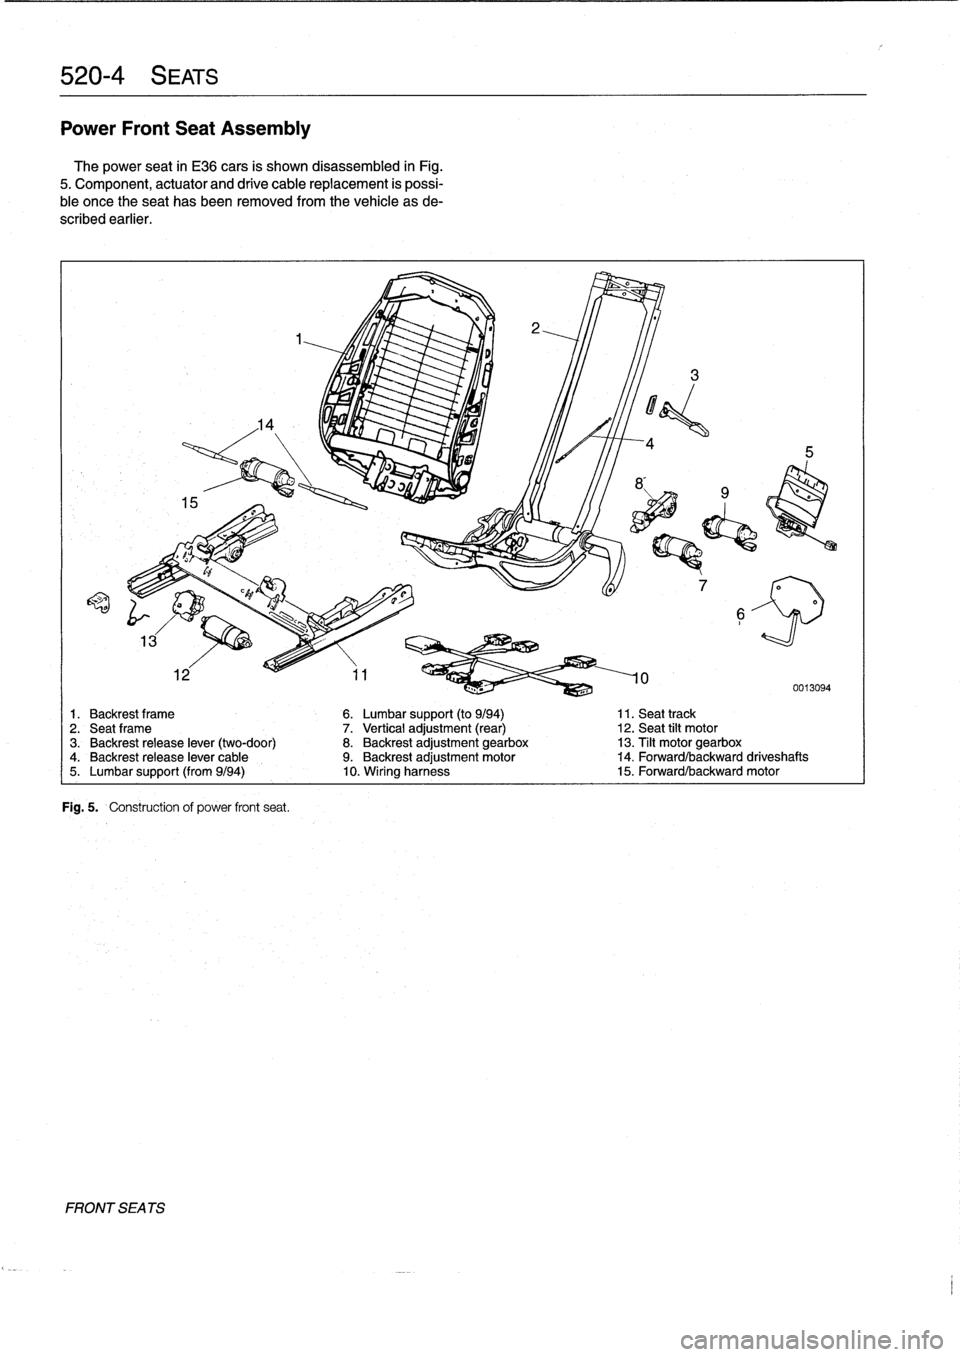 BMW 318i 1998 E36 Workshop Manual 
520-
4
SEATS

Power
Front
Seat
Assembly
The
power
seat
in
E36
cars
is
shown
disassembled
in
Fig
.

5
.
Component,
actuator
and
drive
cable
replacement
is
possi-
ble
once
theseat
has
been
removed
from